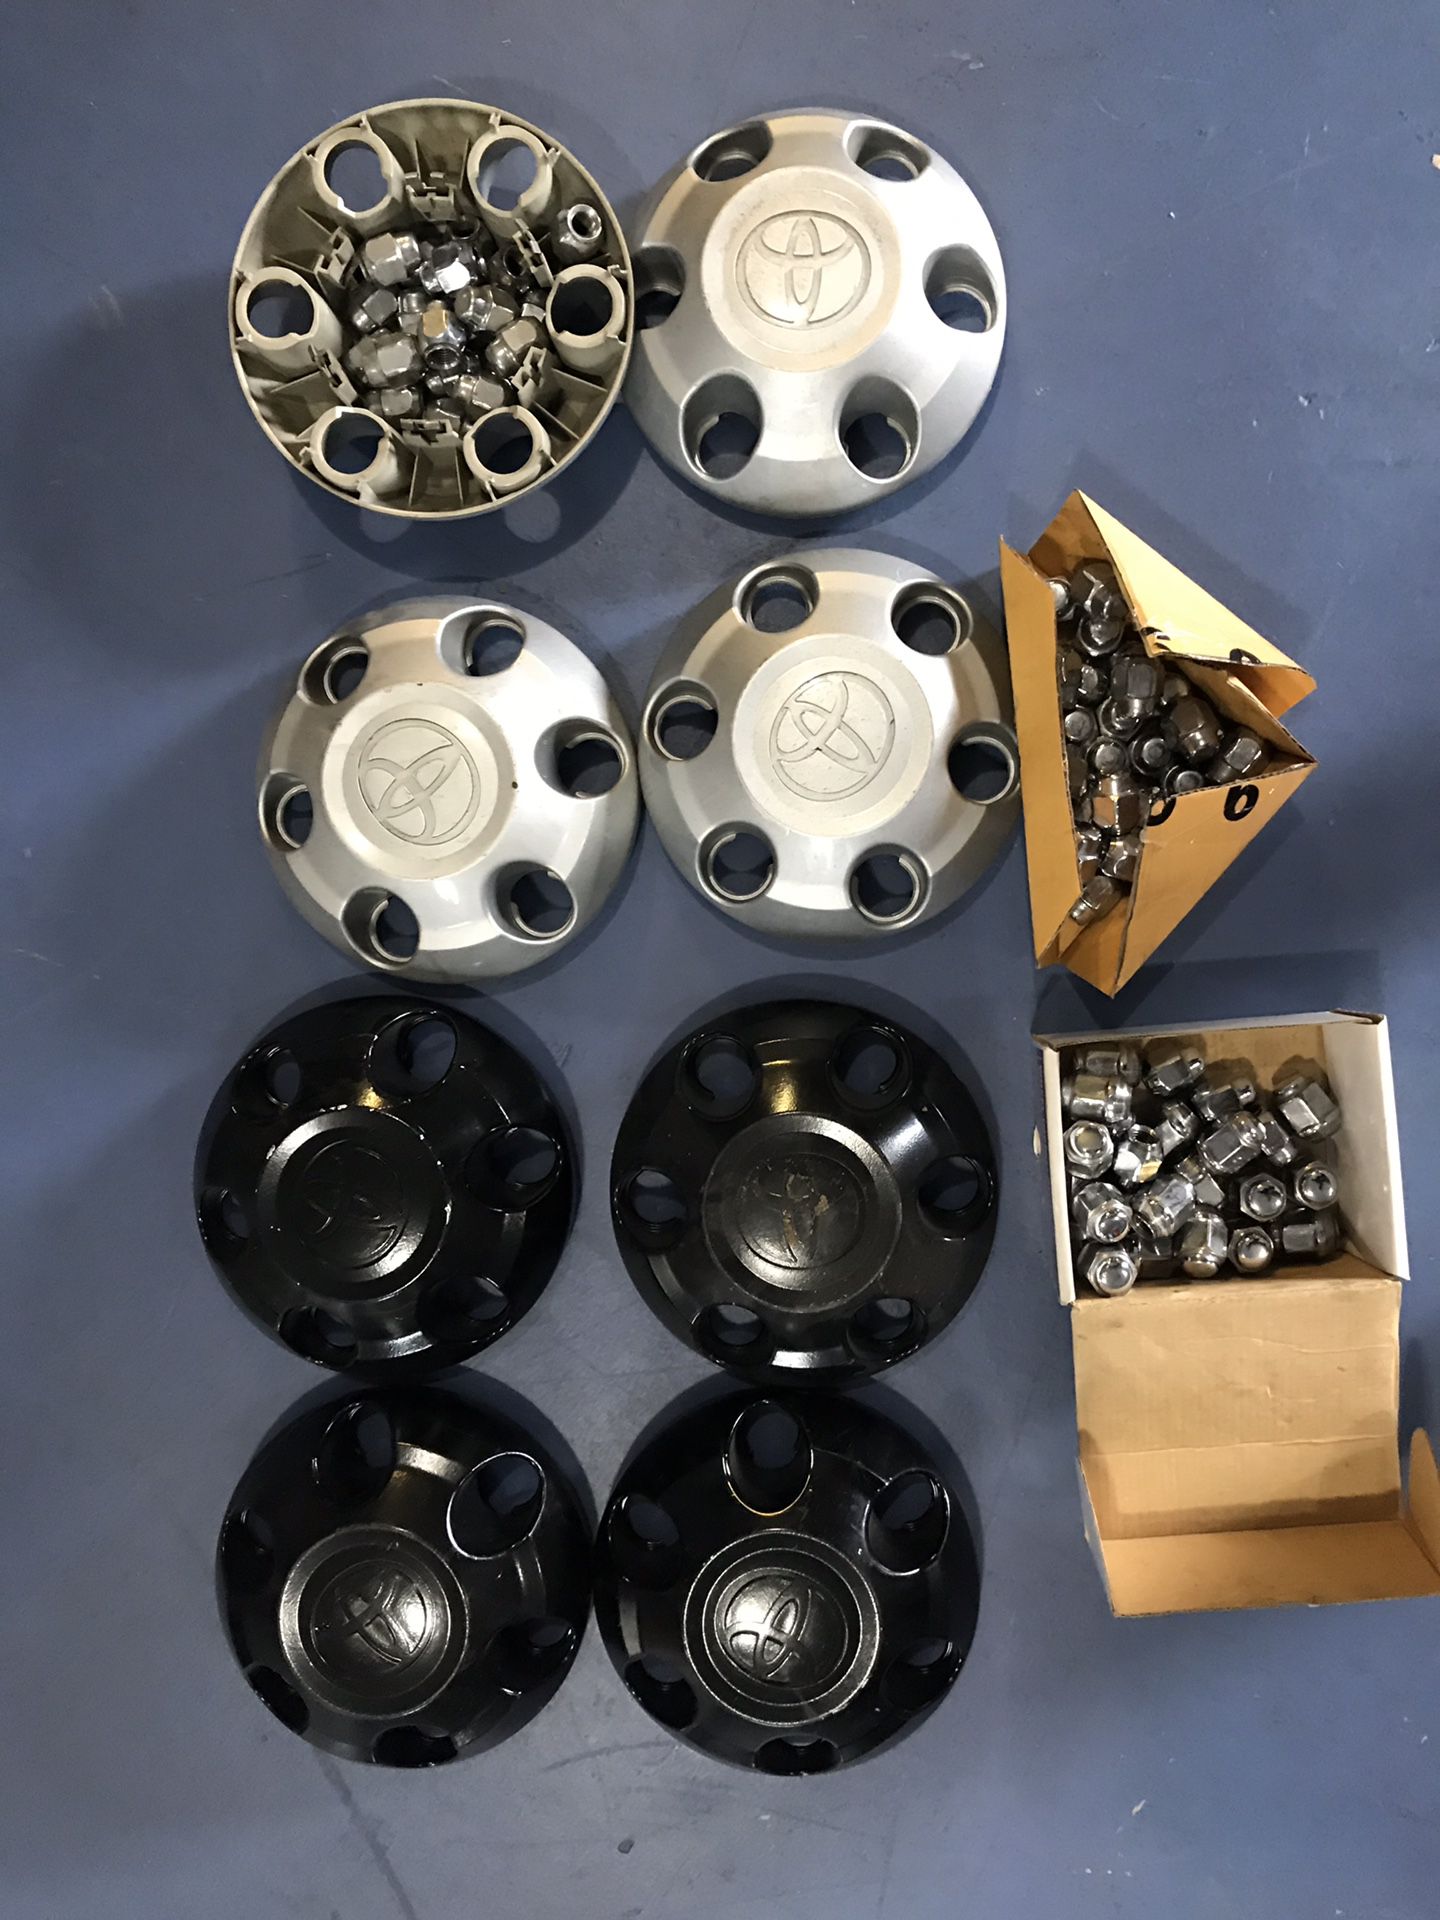 Toyota assorted parts